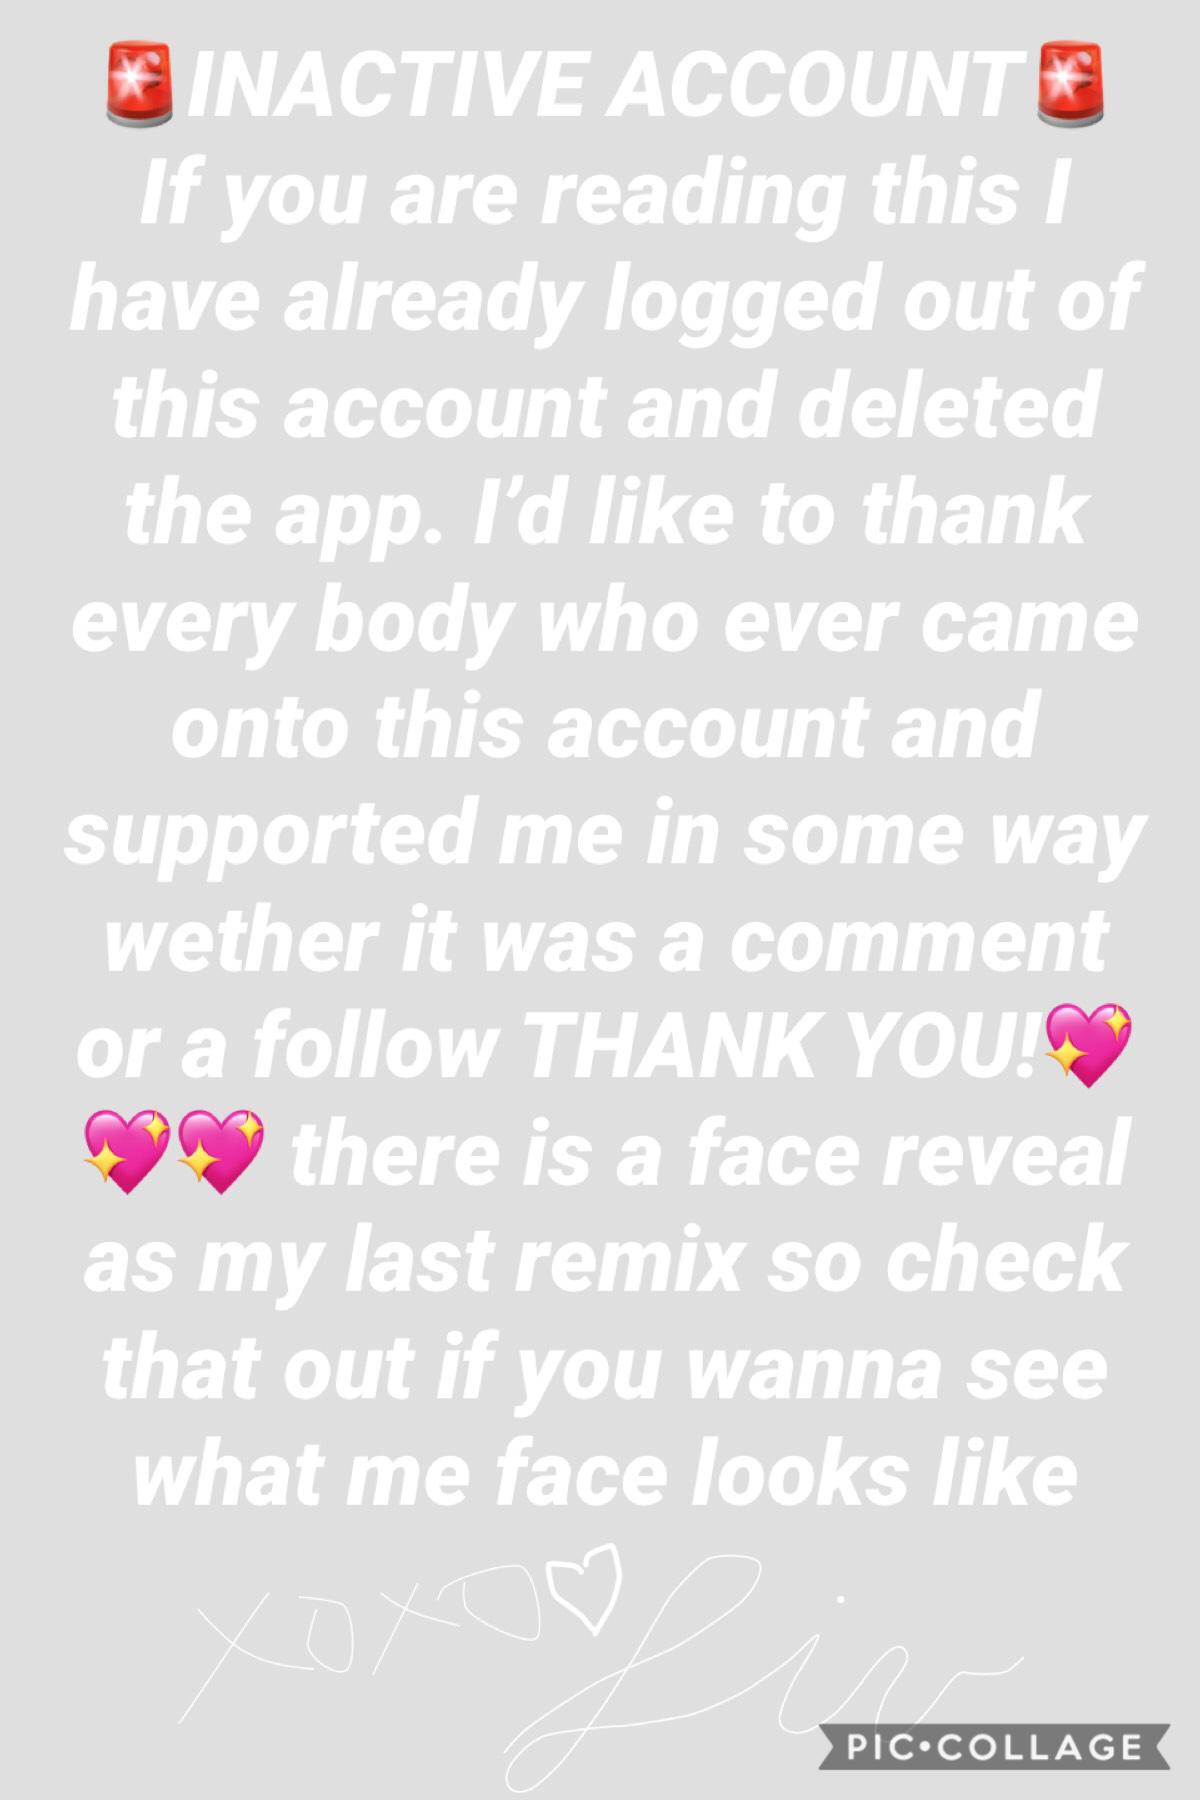 Tap

✨FACE REVEAL IN REMIXES✨
🎇 HAPPY 2020🎇
✌🏼STAY KIND✌🏼
🌿BE HAPPY🌿
💖YOURE ABSOLUTELY STUUNING💖
Love y’all and I wish every one of you good luck with the rest of your life! 
